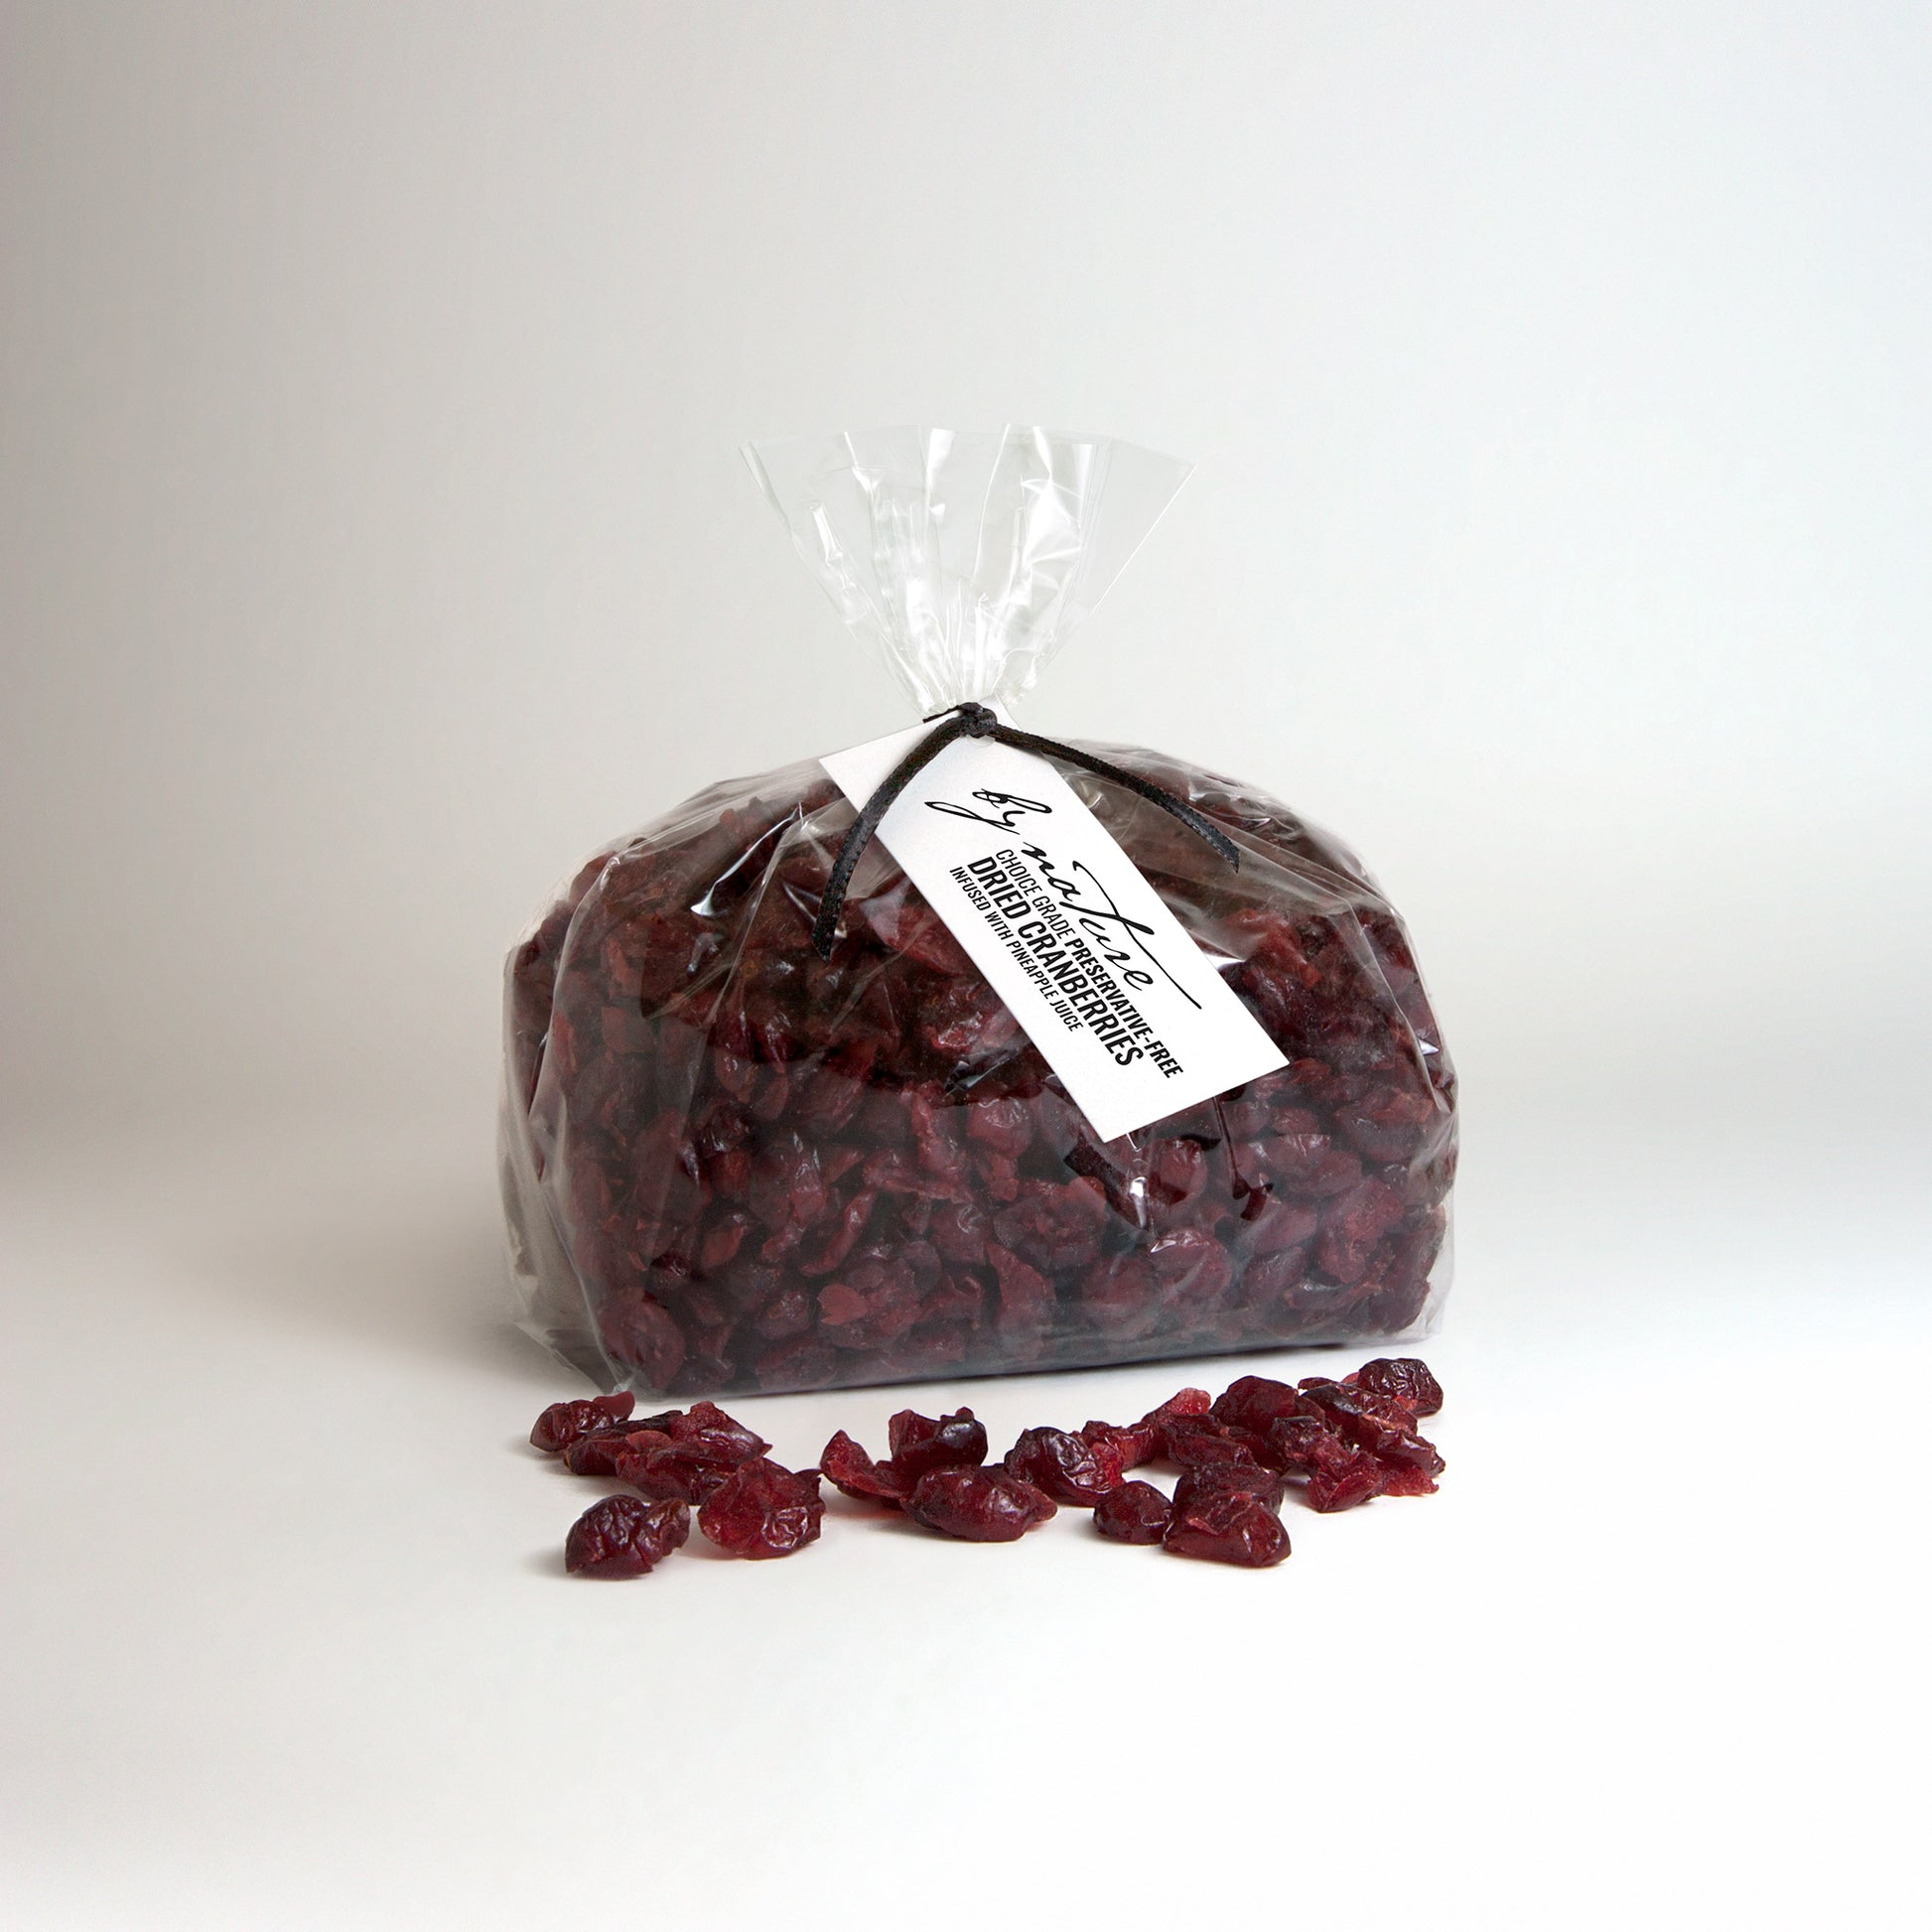 BY NATURE Dried Cranberries, 500g - pineapple juice infused, preservative-free.